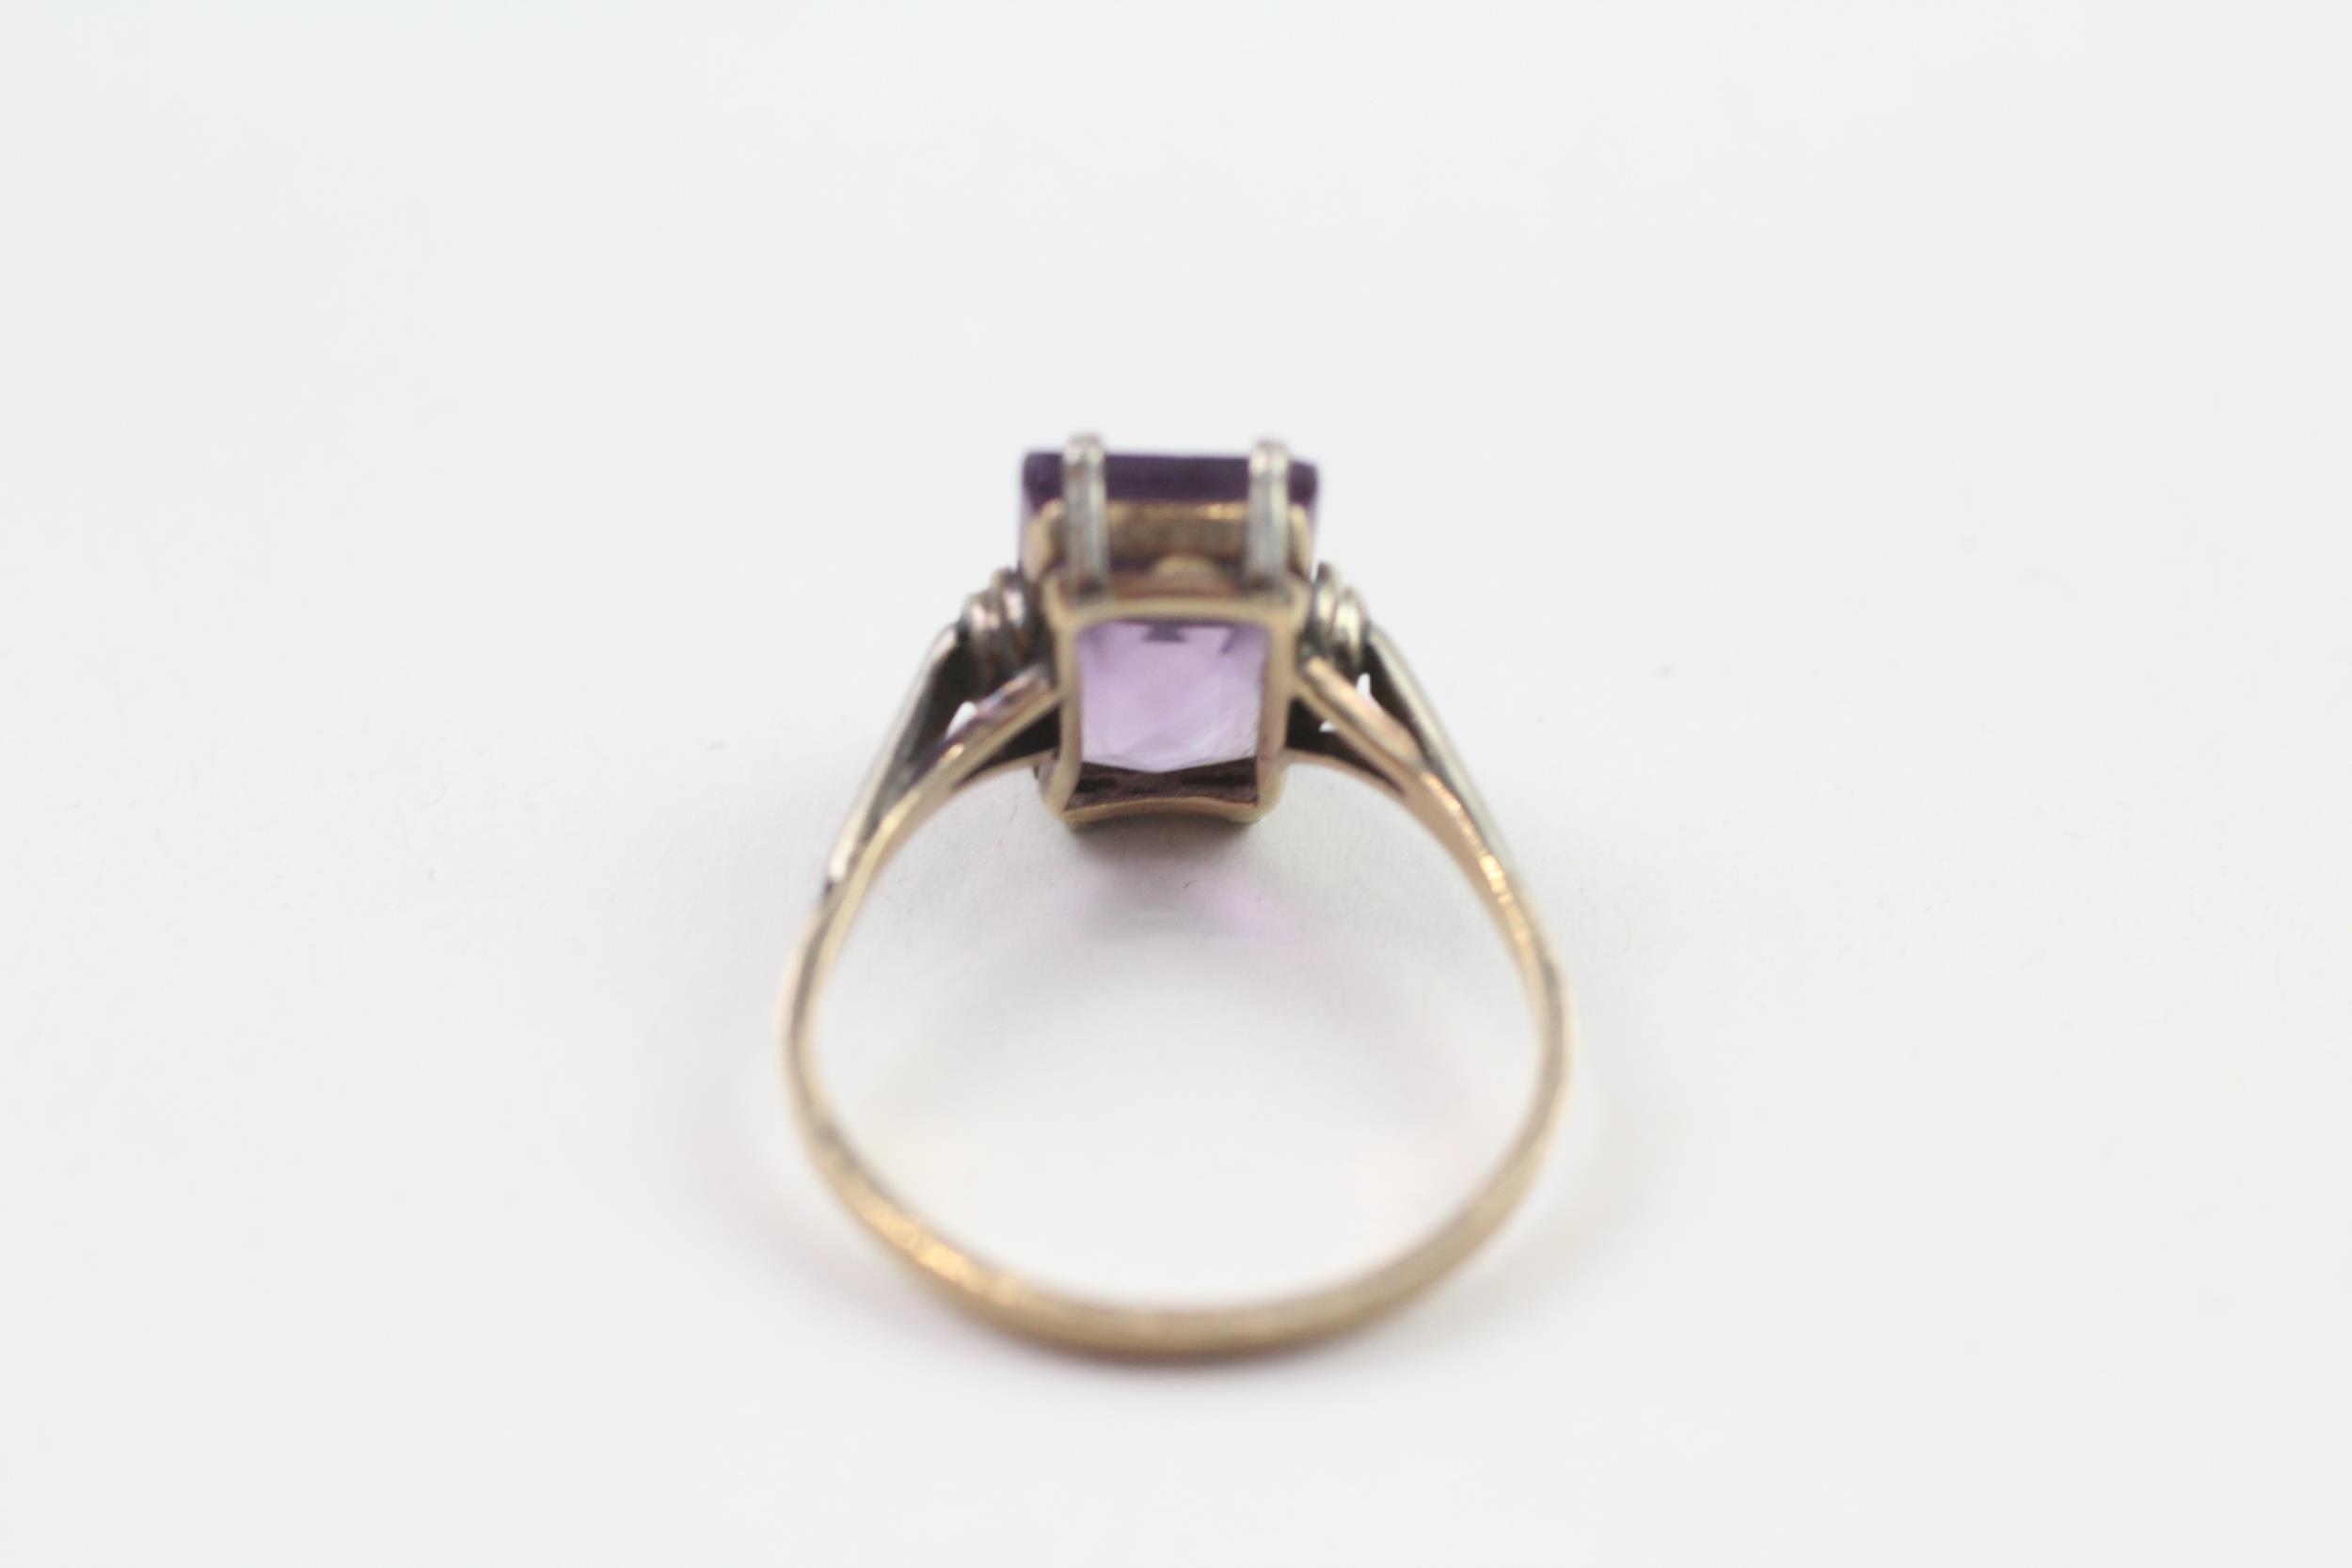 9ct gold antique fancy cut amethyst single stone ring Size L 1/2 2.1 g - Image 4 of 4